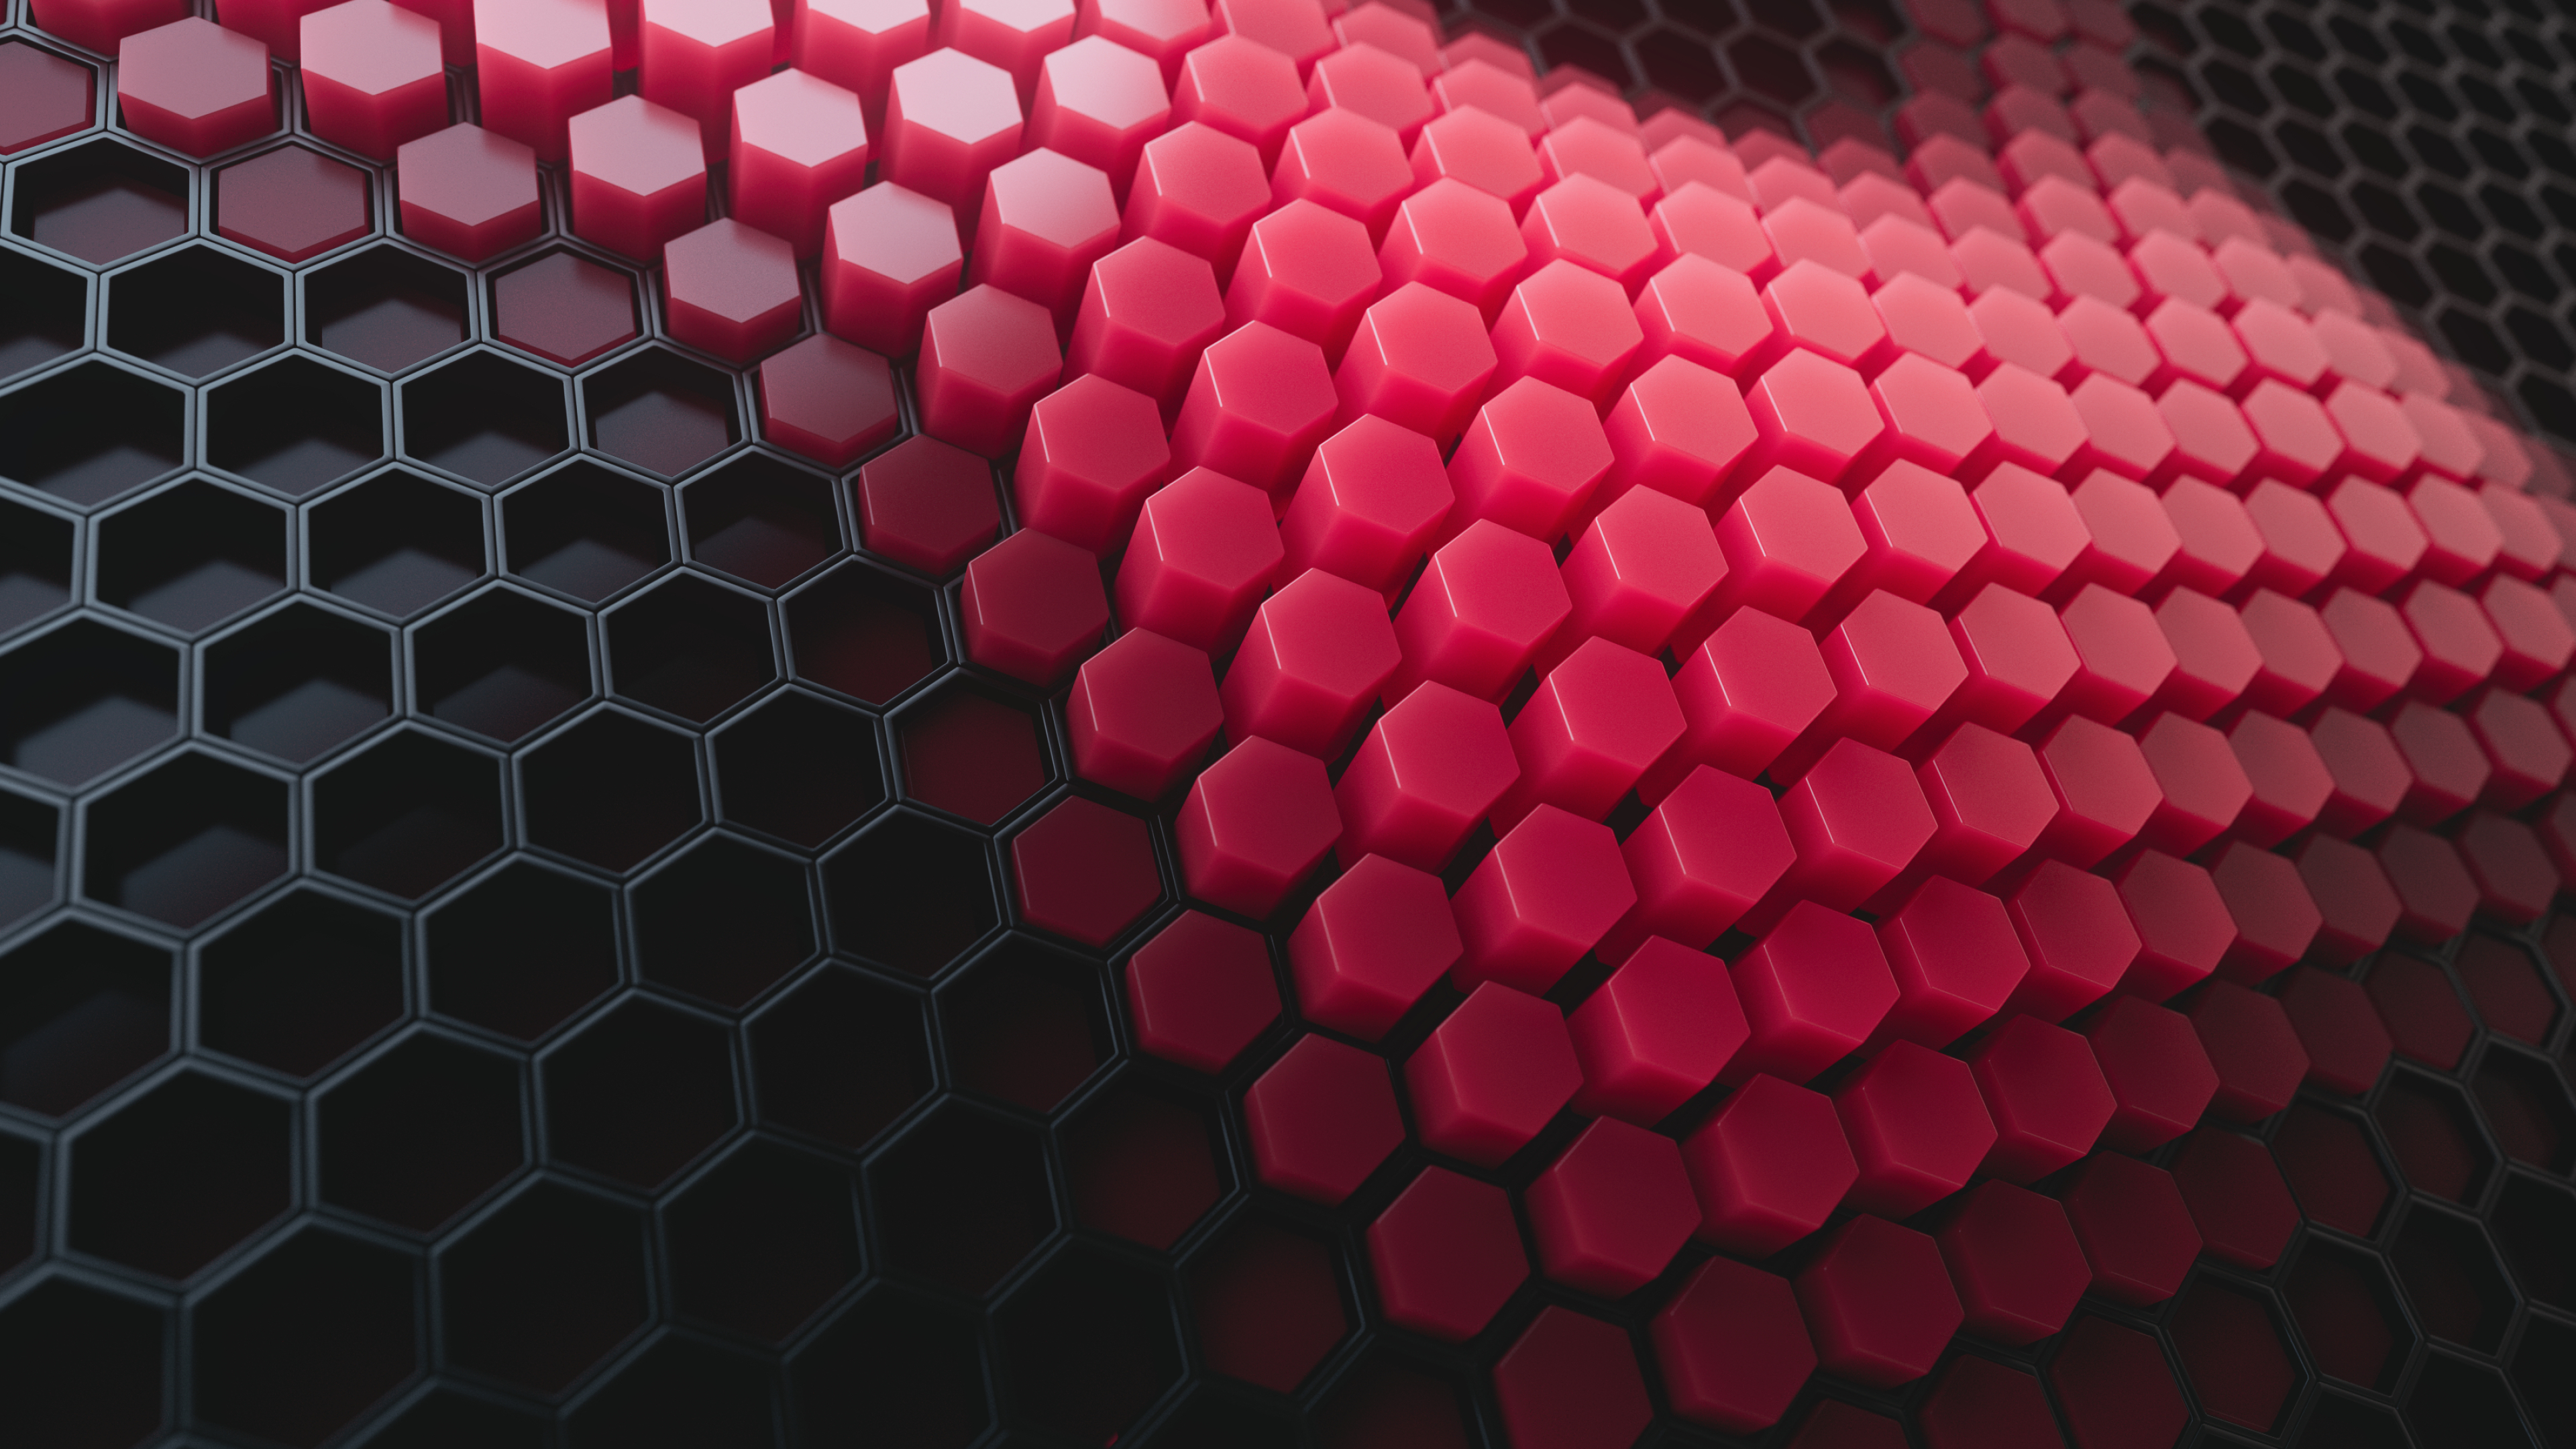 3840x2160 Red and Black Hexagon Wallpapers Top Free Red and Black Hexagon Backgrounds